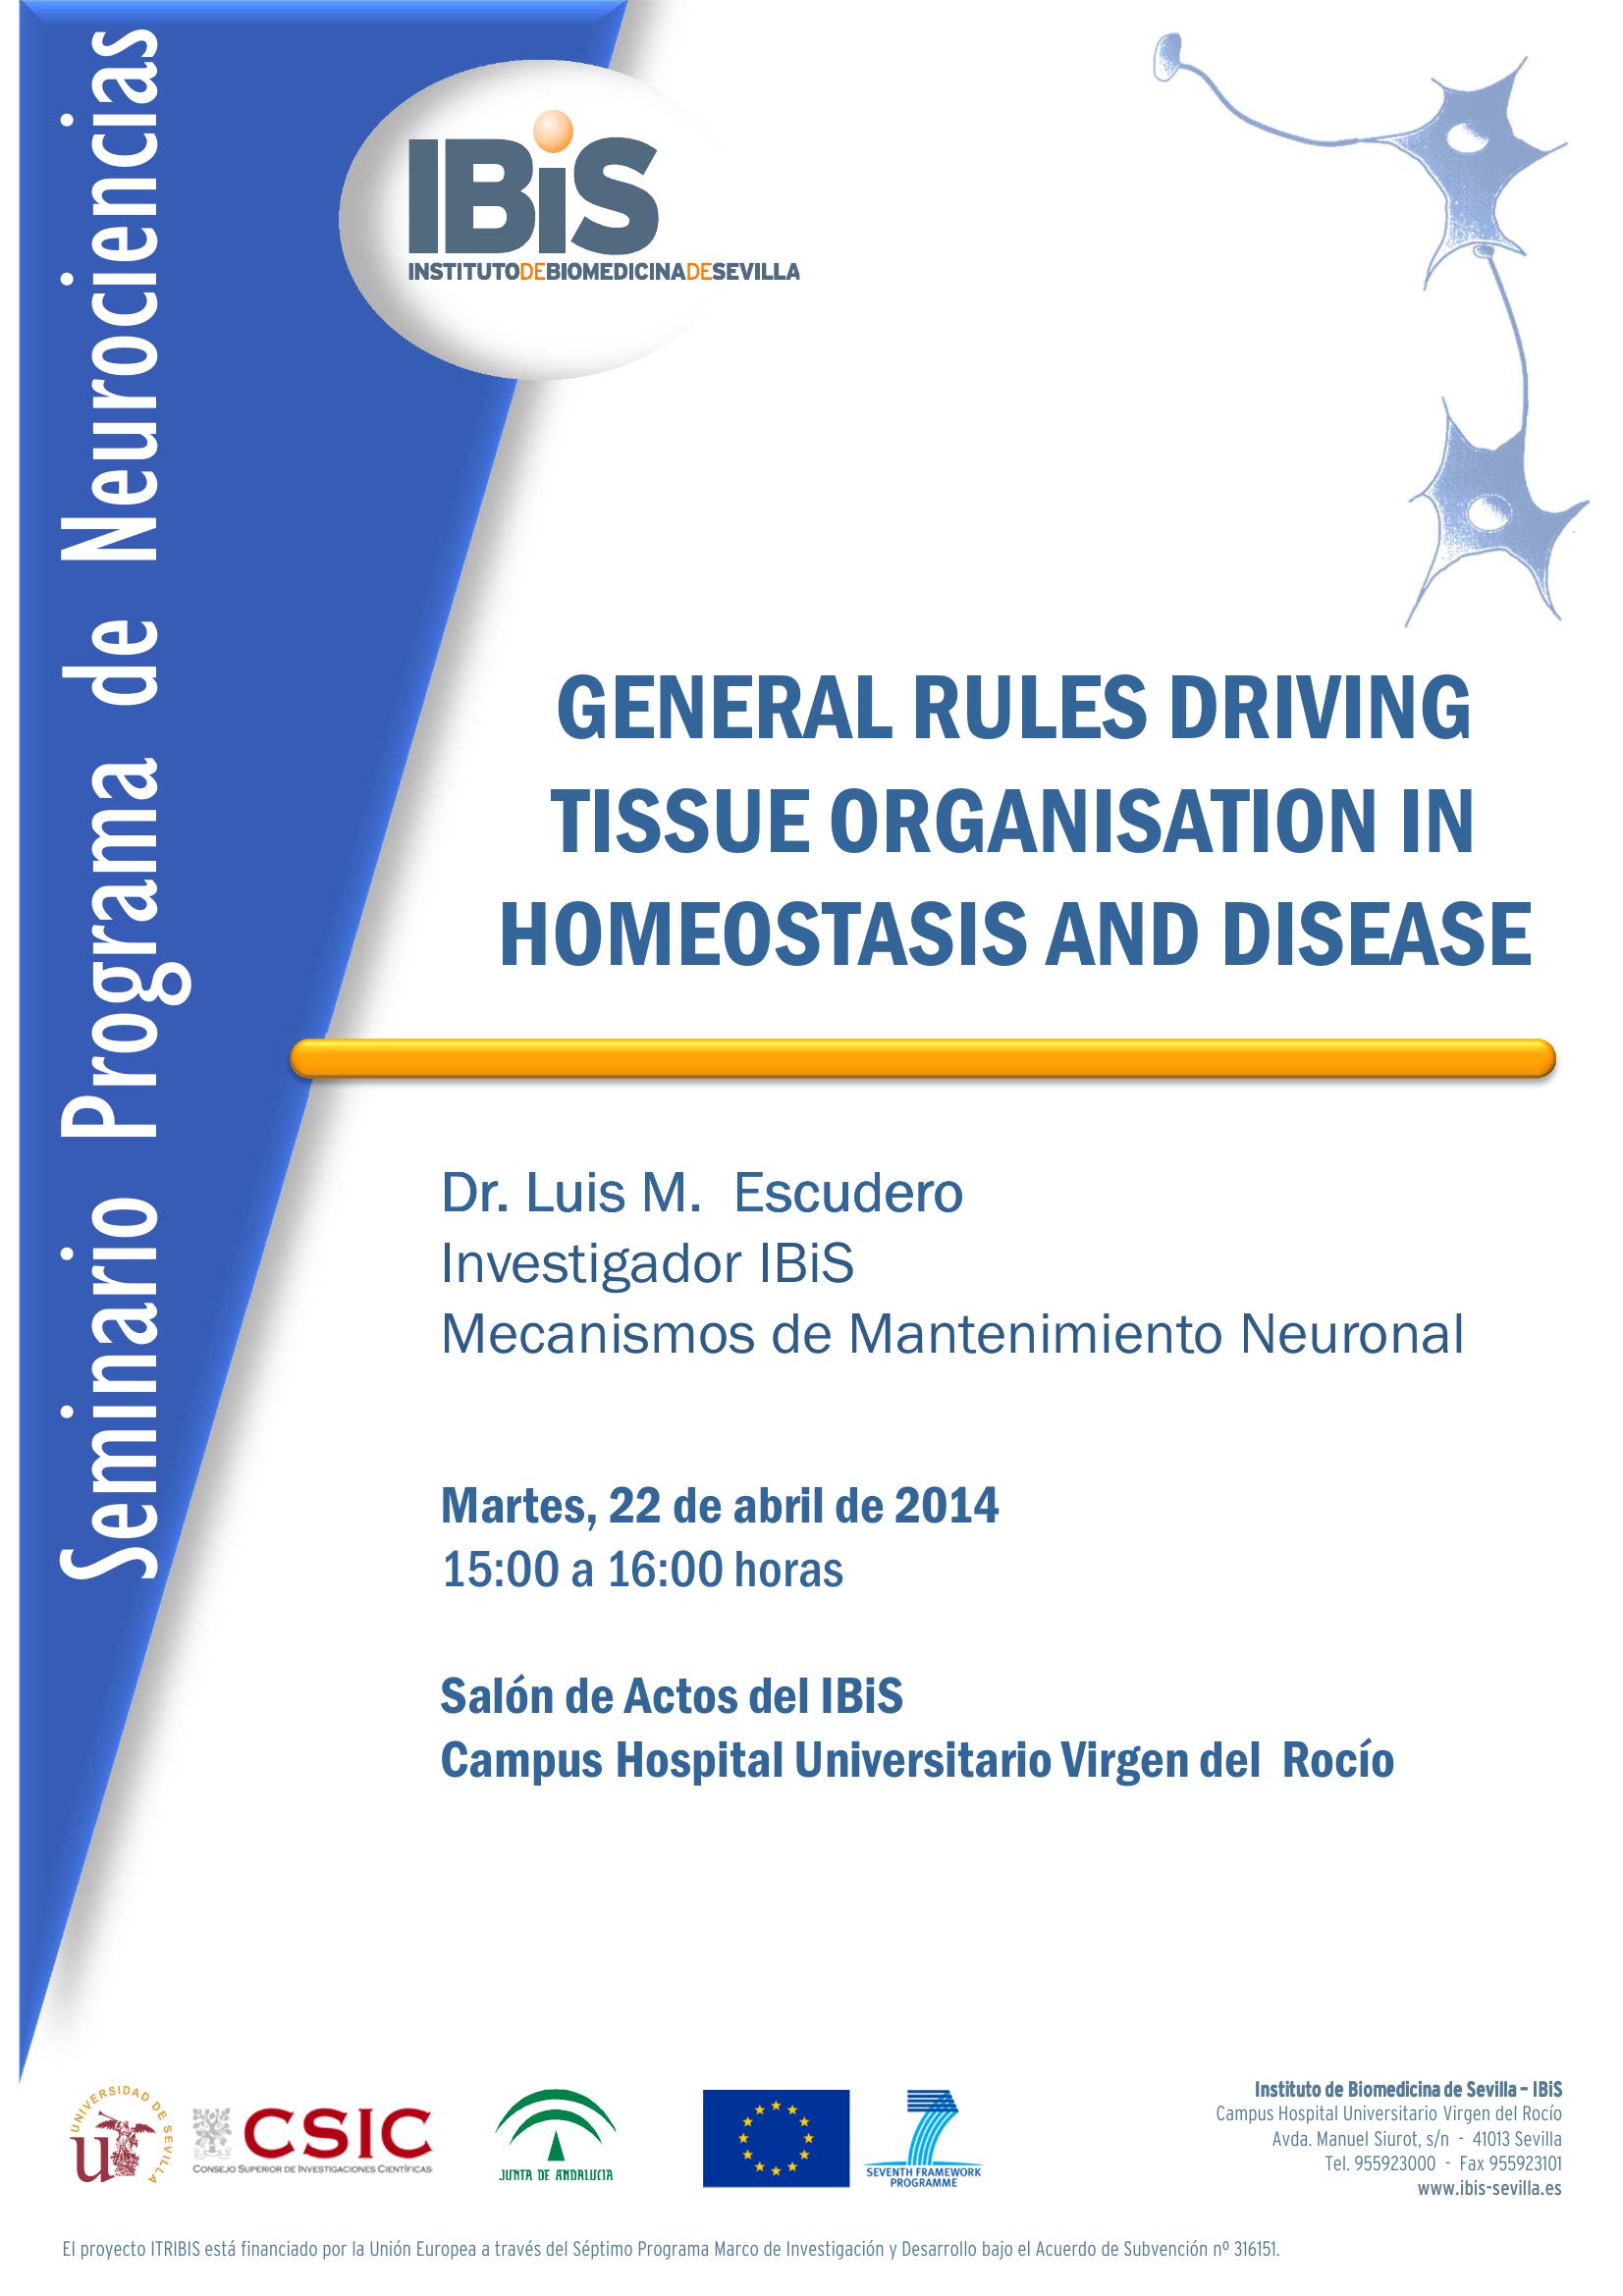 Poster: GENERAL RULES DRIVING TISSUE ORGANISATION IN HOMEOSTASIS AND DISEASE